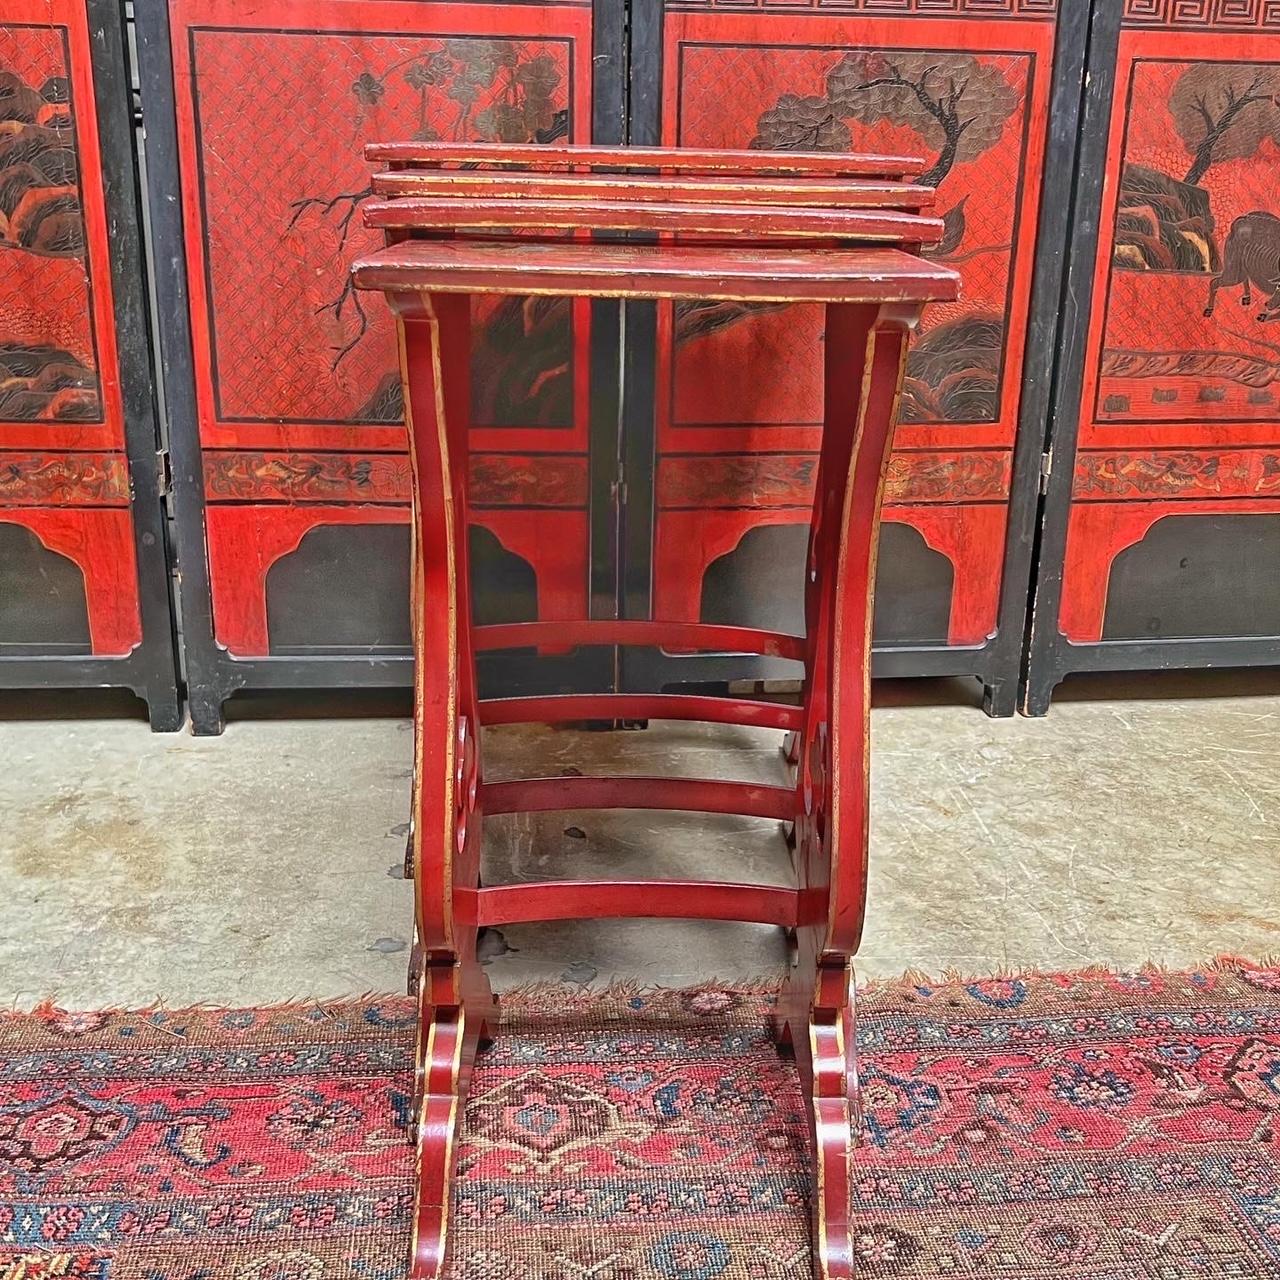 A charming set of four English red lacqured and Japanned -Chinoiserie nesting tables dating from the late 19th century. All four tables are decorated with red crackled lacquer with gilded and painted decoration. They are highly decorative and very